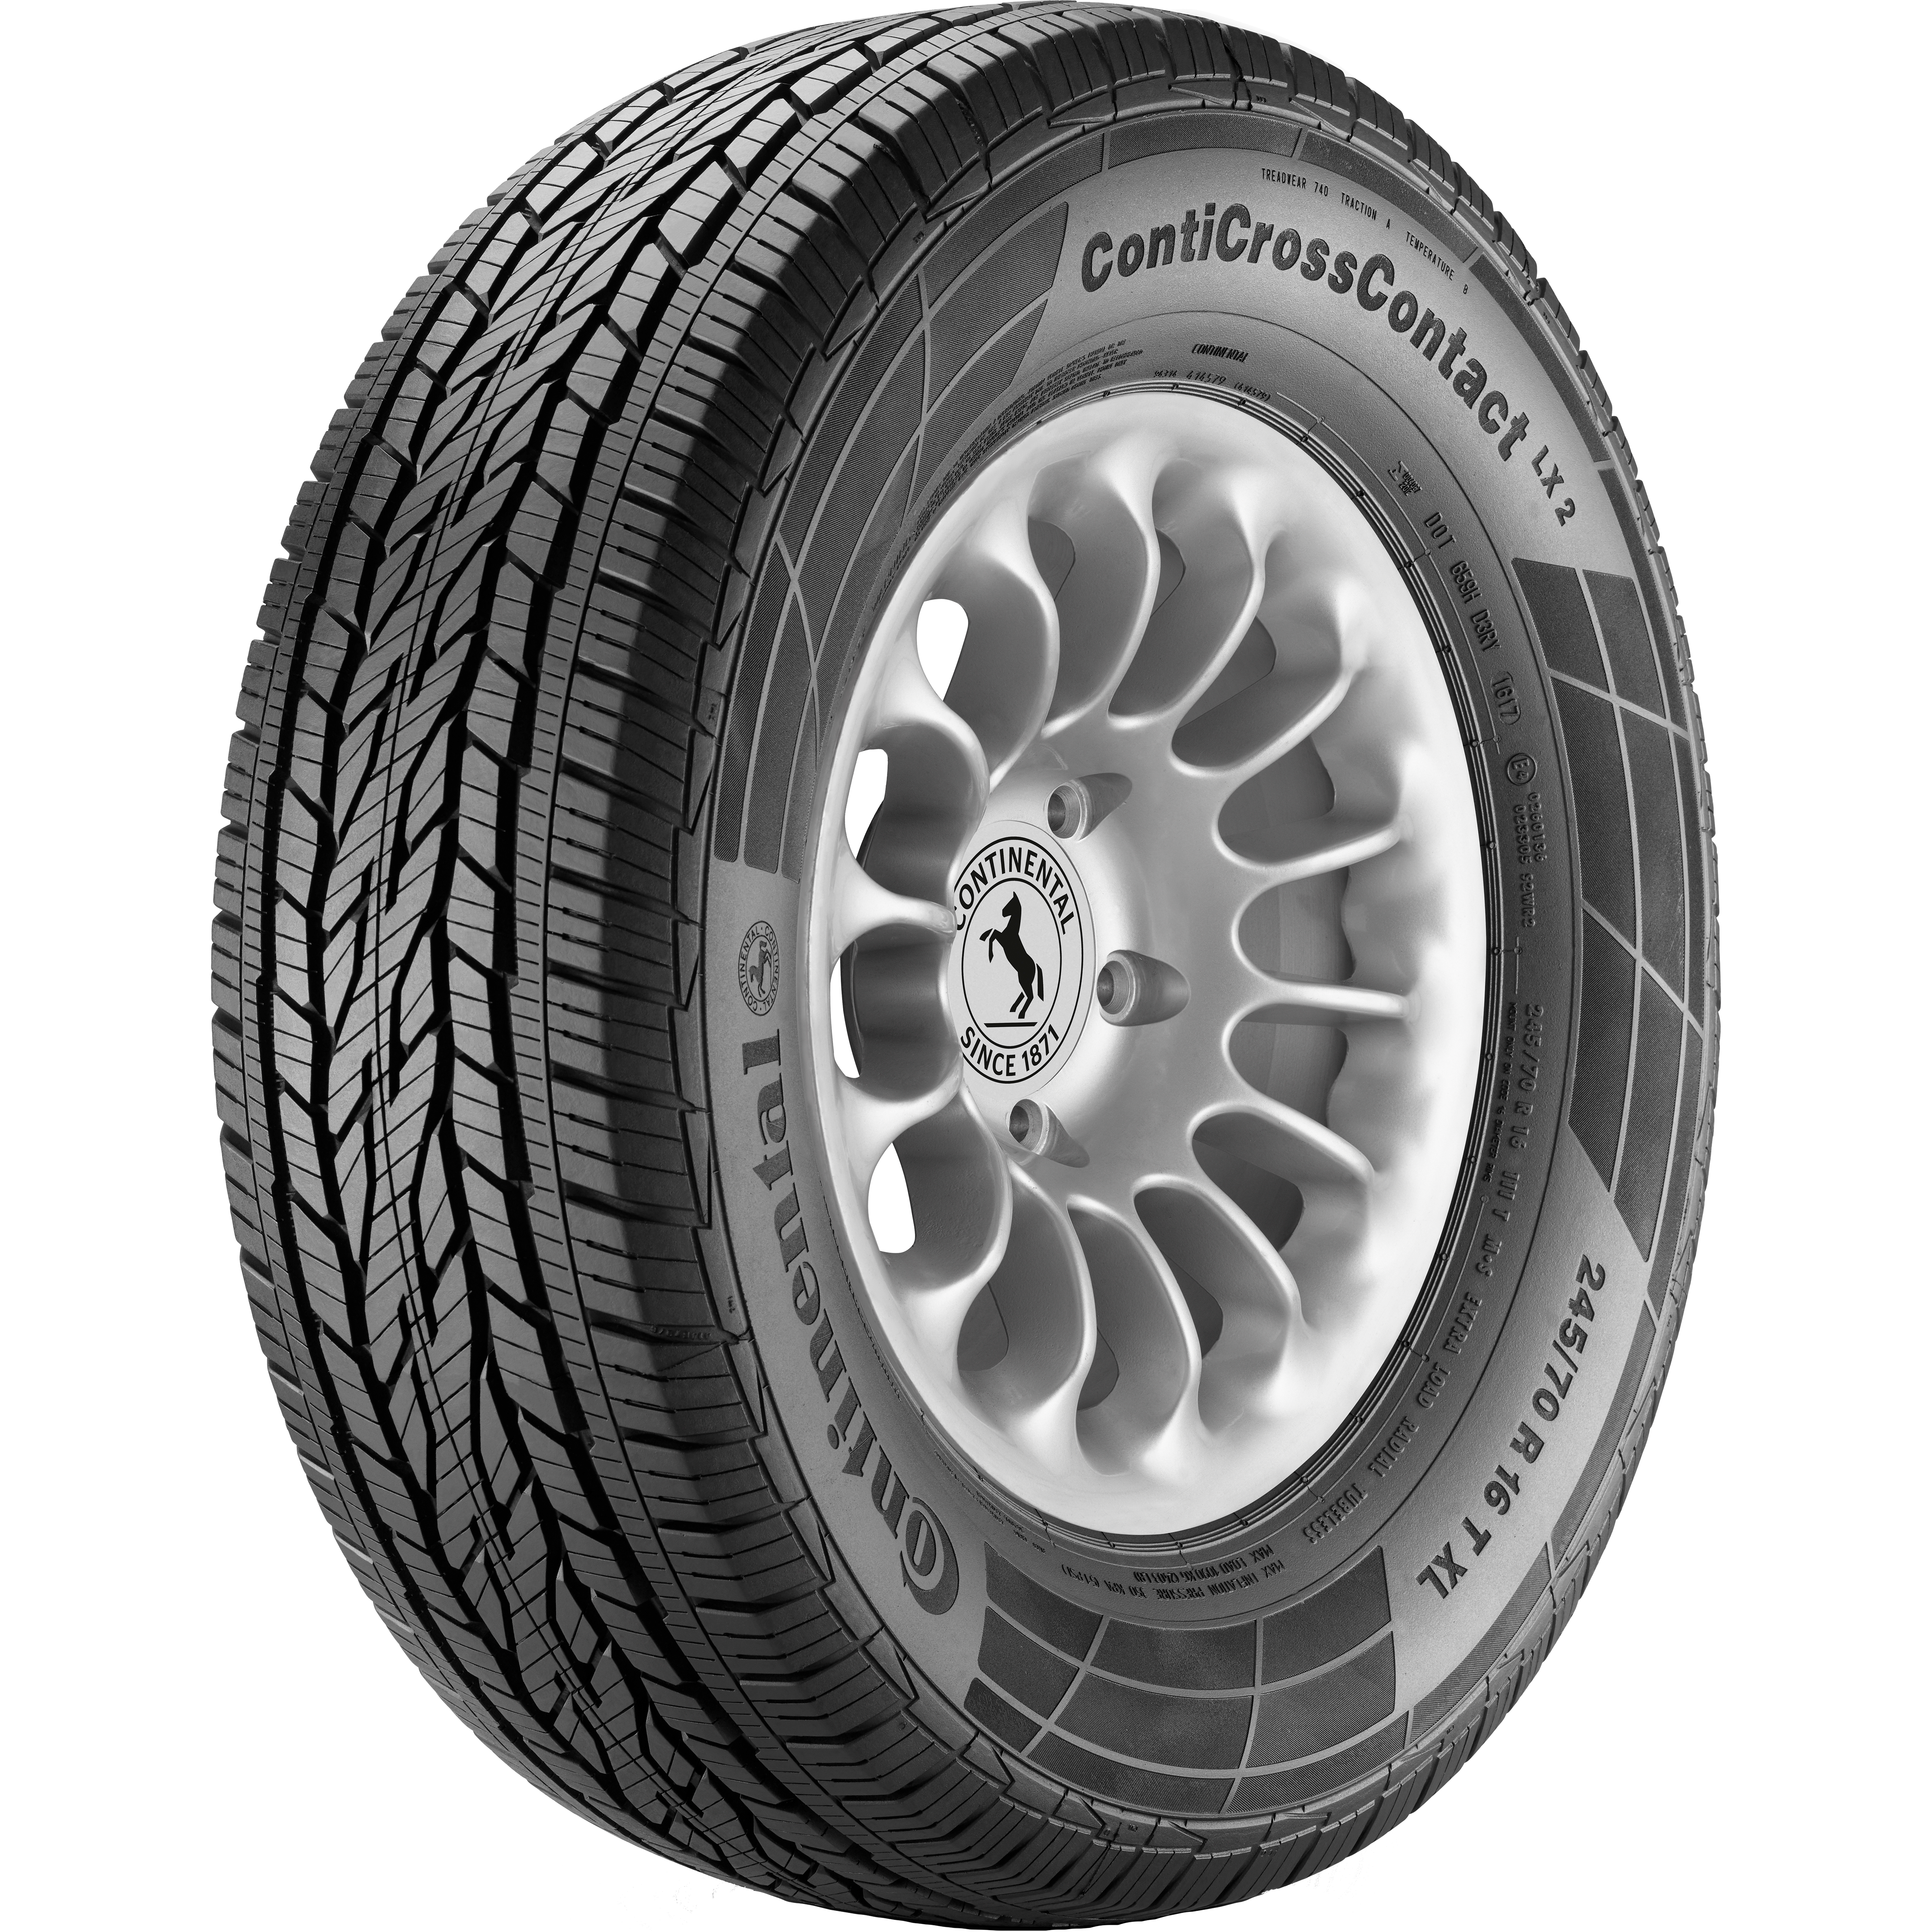 255/65 R 16 109H CONTICROSSCONTACT LX 2 Evc m+s Fr TL